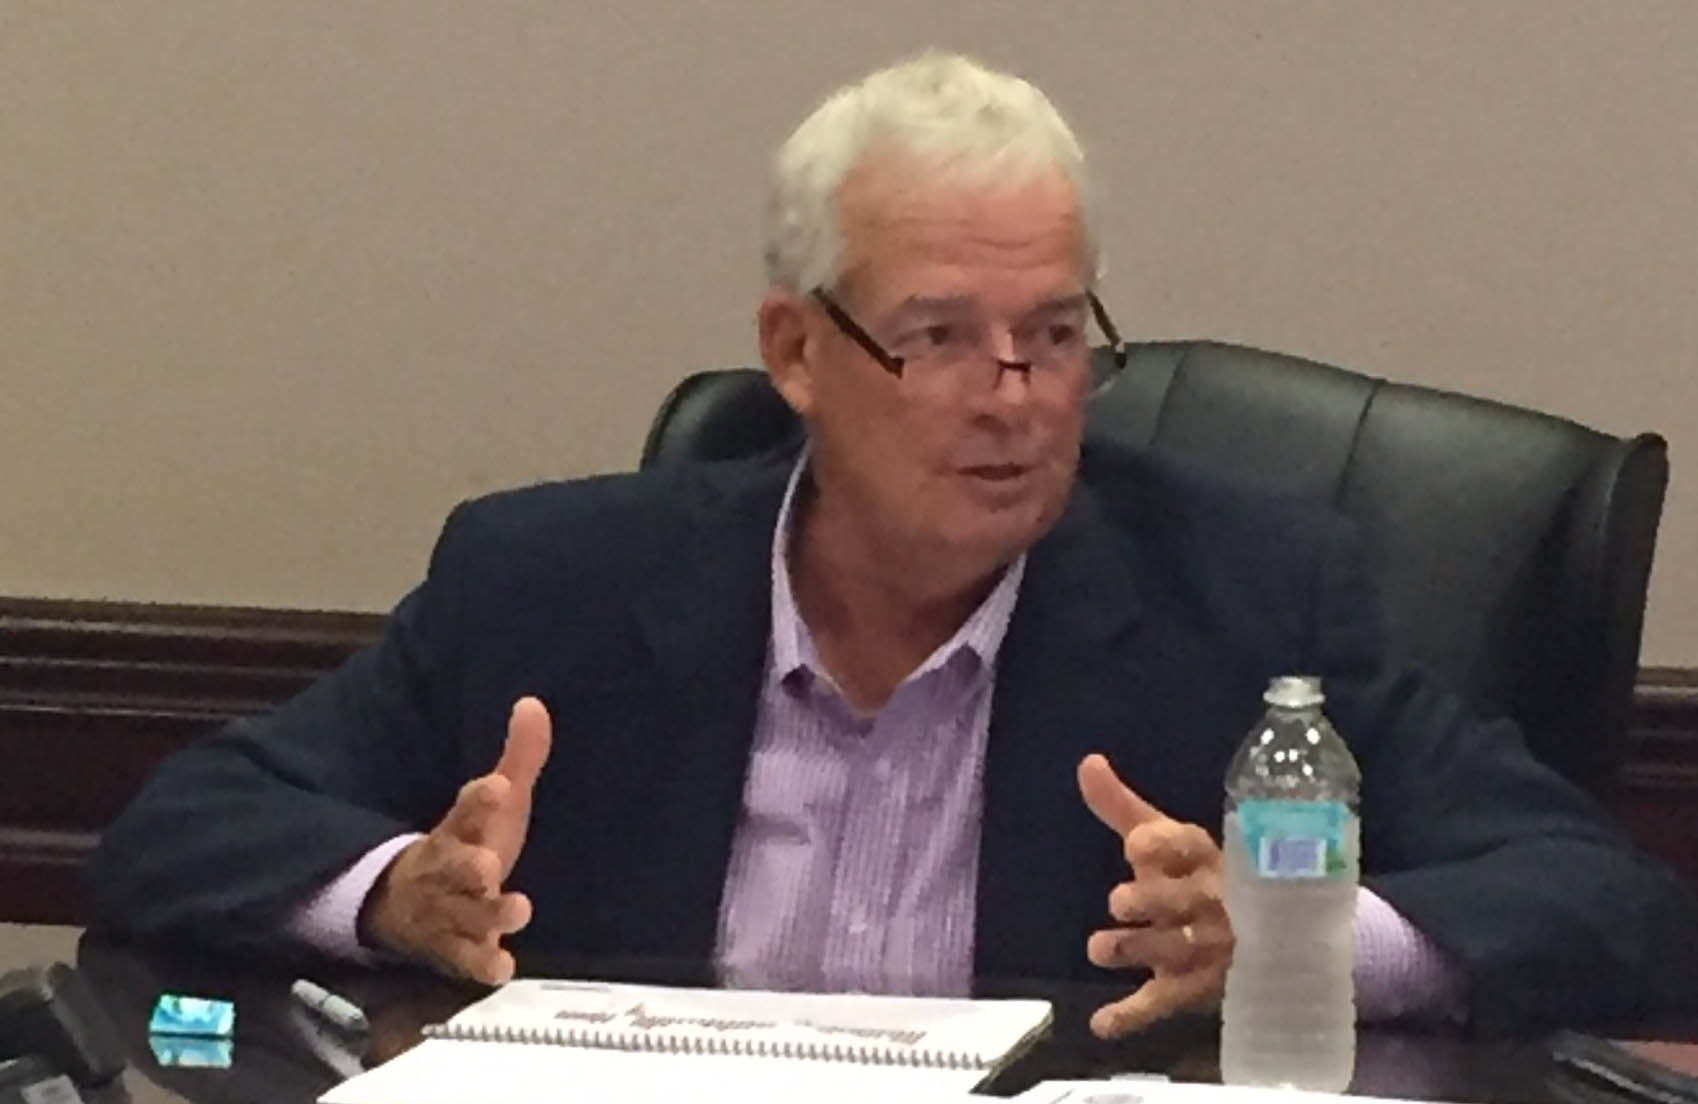 Mr. Peter Hapgood, Director - Institutional Services of Intercontinental Real Estate Corp. presented the year end report to the Board. Mr. Hapgood also outlined a Debt Appreciation Sensitivity Analysis. Great way to start of year off.